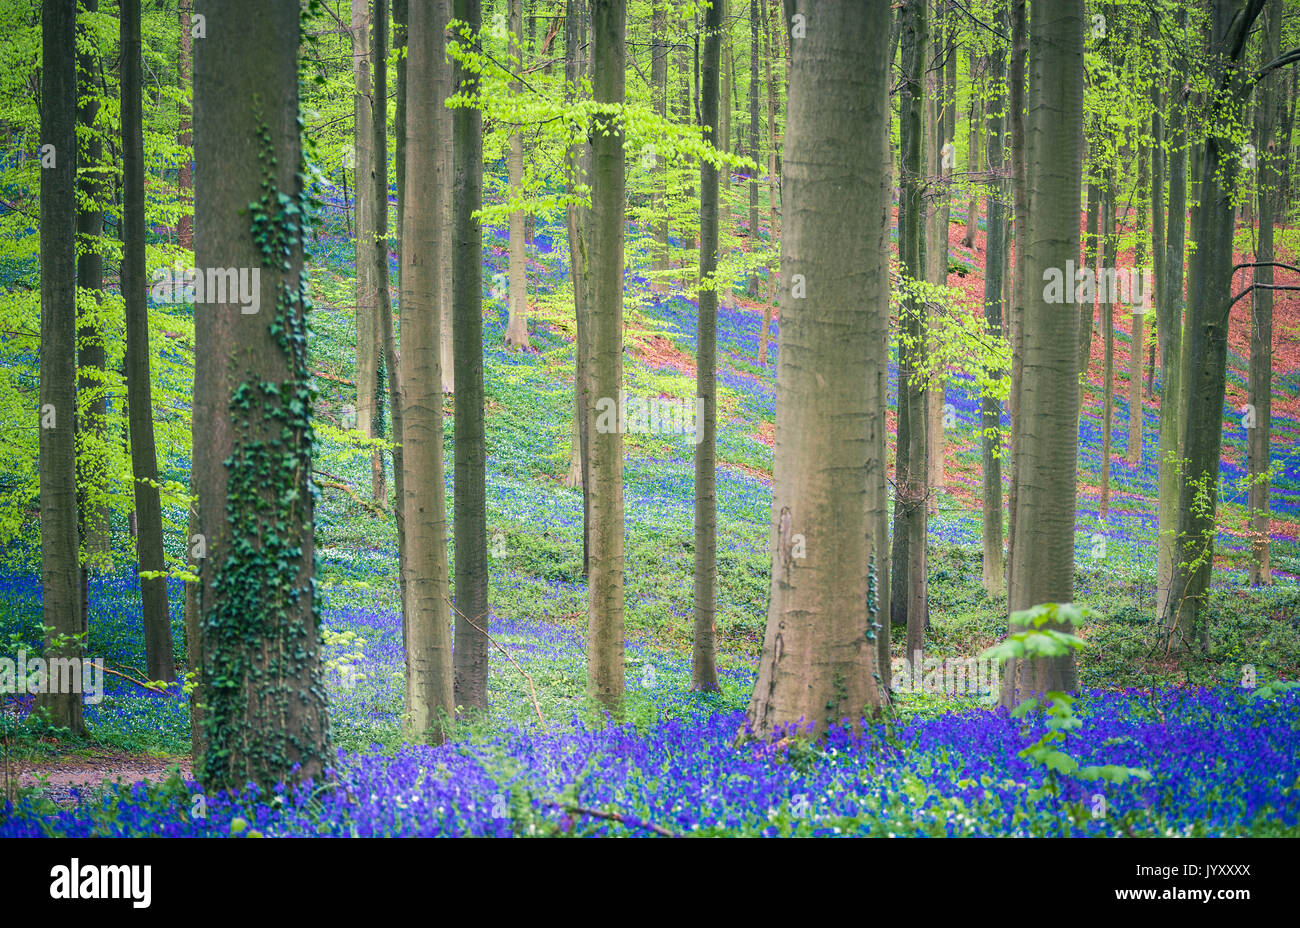 Bluebells into the Halle Forest, Halle, Bruxelles, Flandres, Belgium Stock Photo